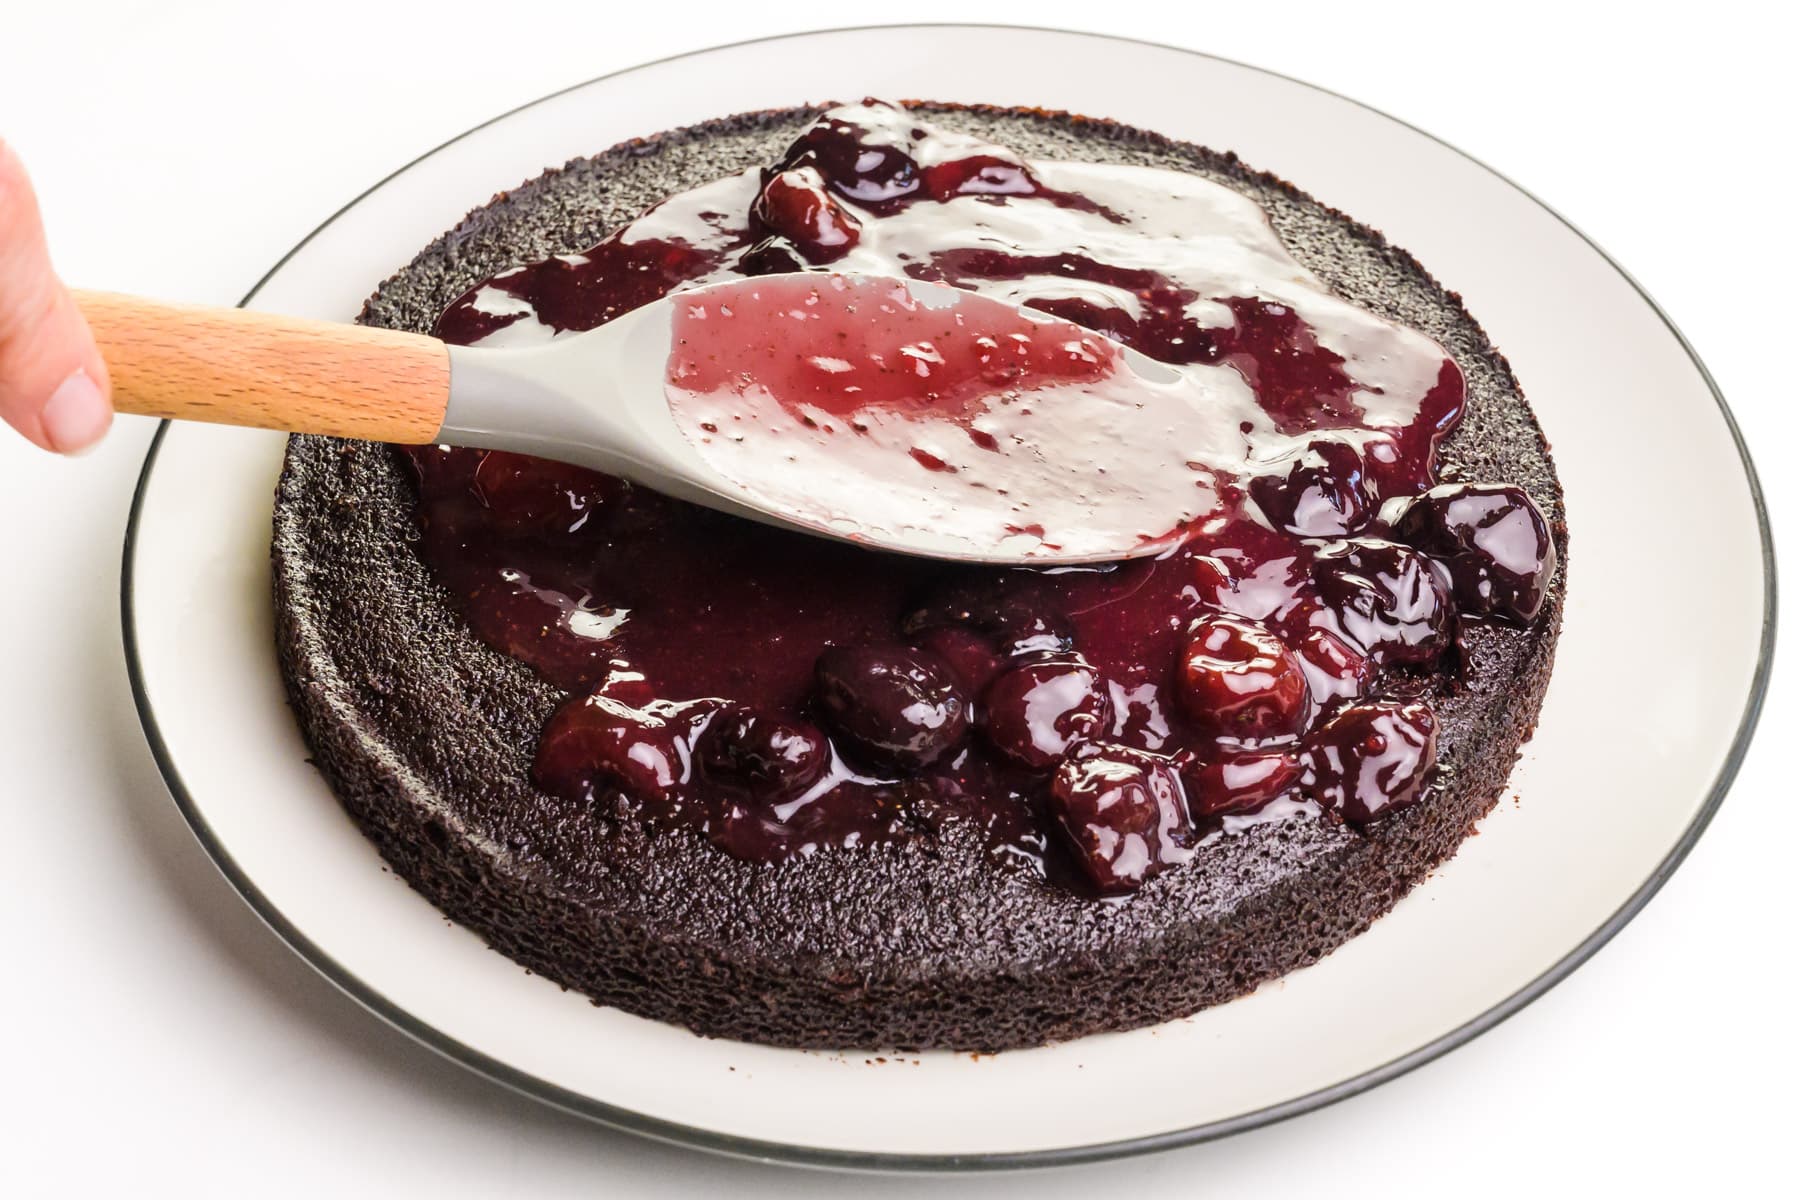 Cherry sauce is being spread with a spatula over a single chocolate cake layer.